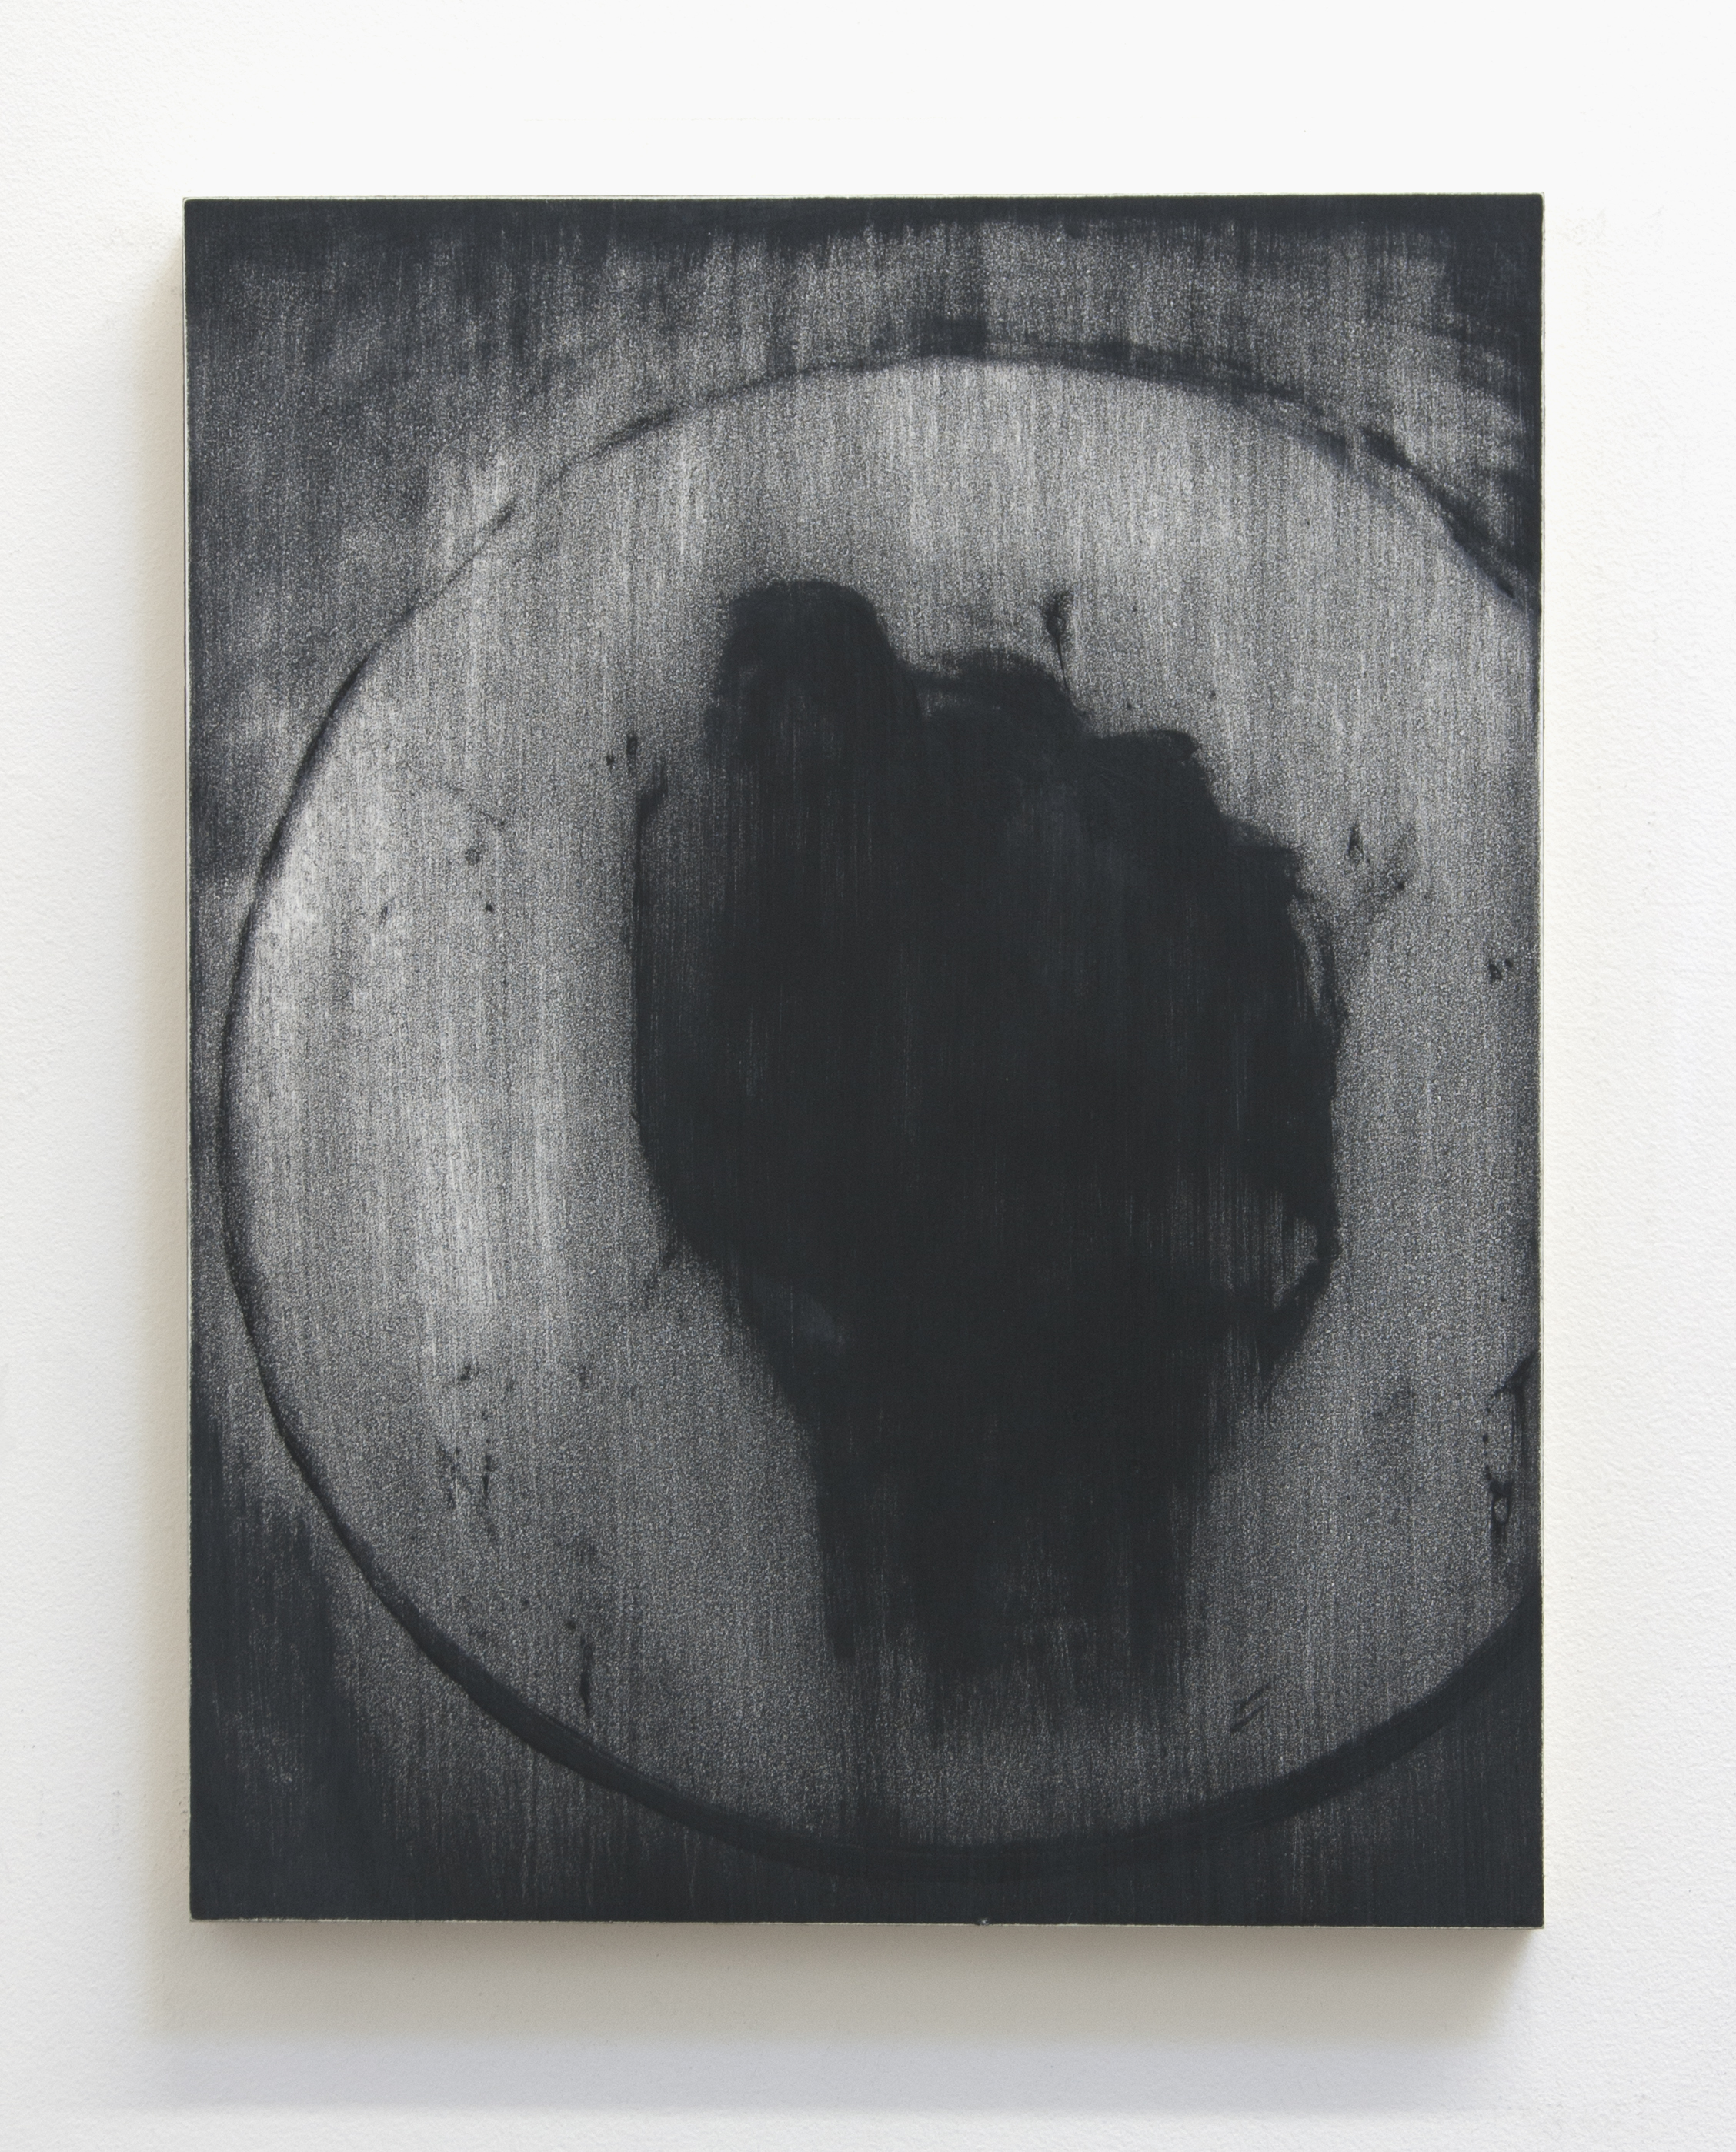  Fist, 2015  Acrylic on panel, 14 x 11 inches 